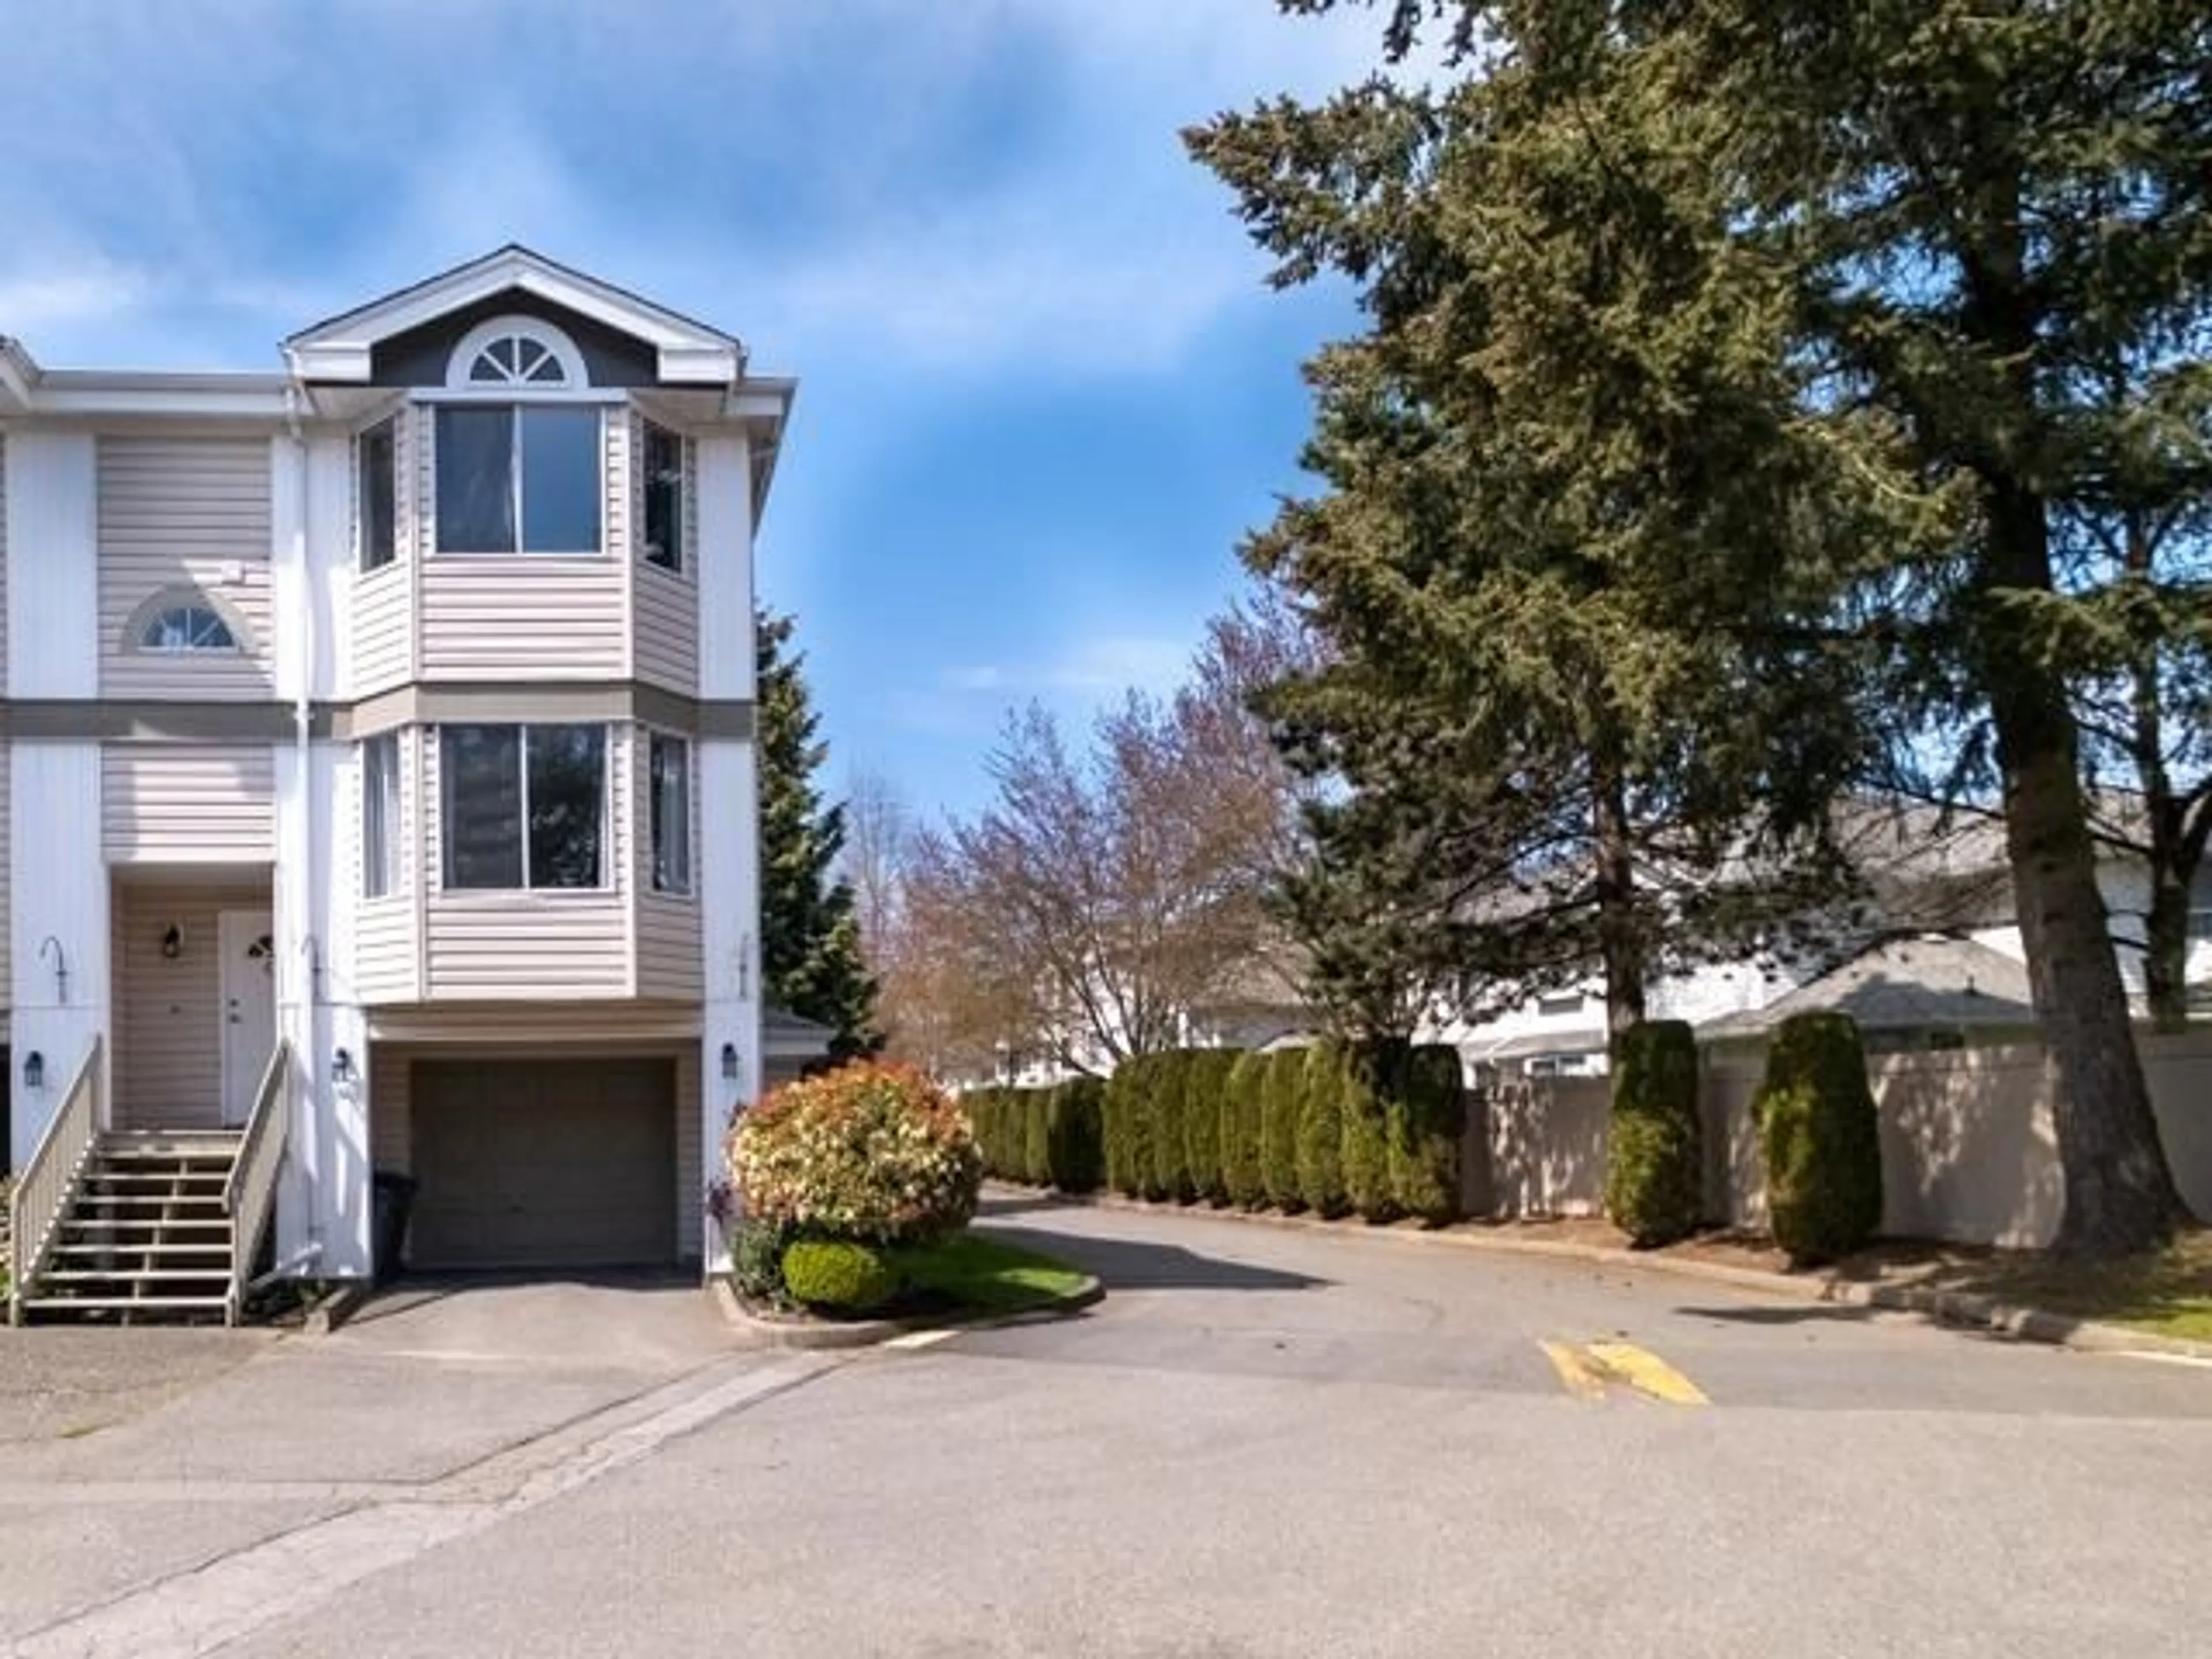 A pic from exterior of the house or condo for 42 7875 122 STREET, Surrey British Columbia V3W0Y8